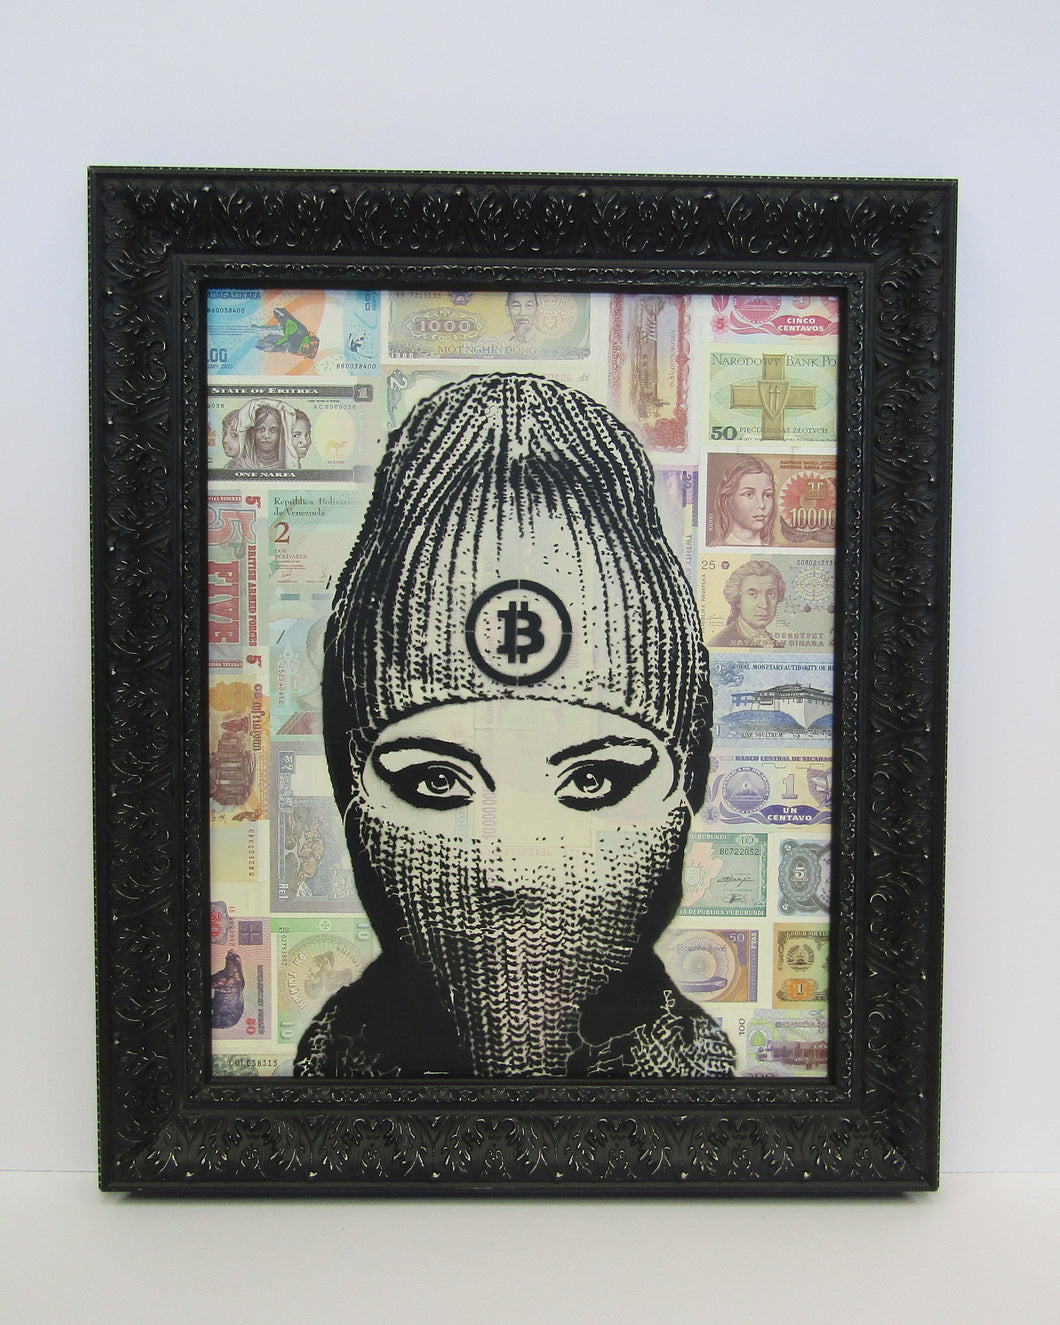 bitcoin over banknotes - 1 of 10